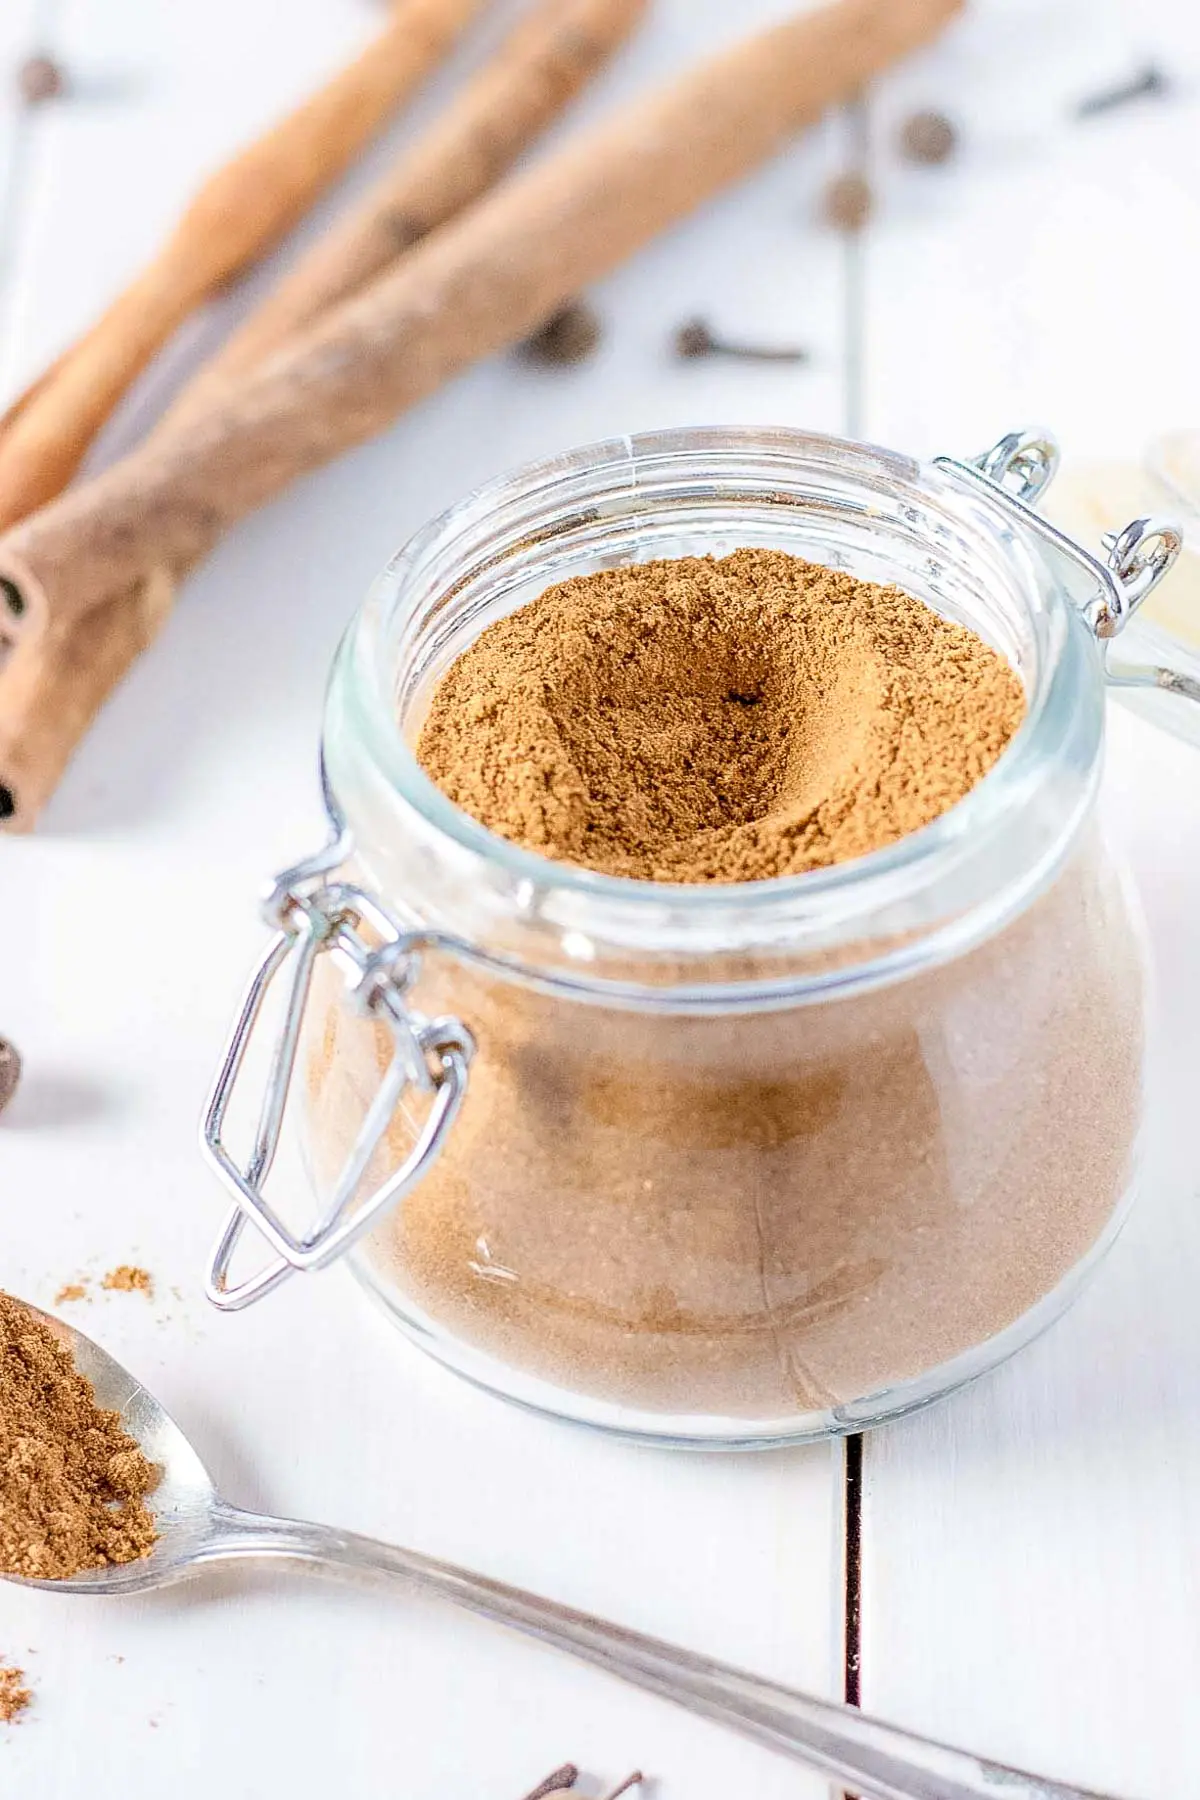 A jar of gingerbread spice with cinnamon sticks behind it.